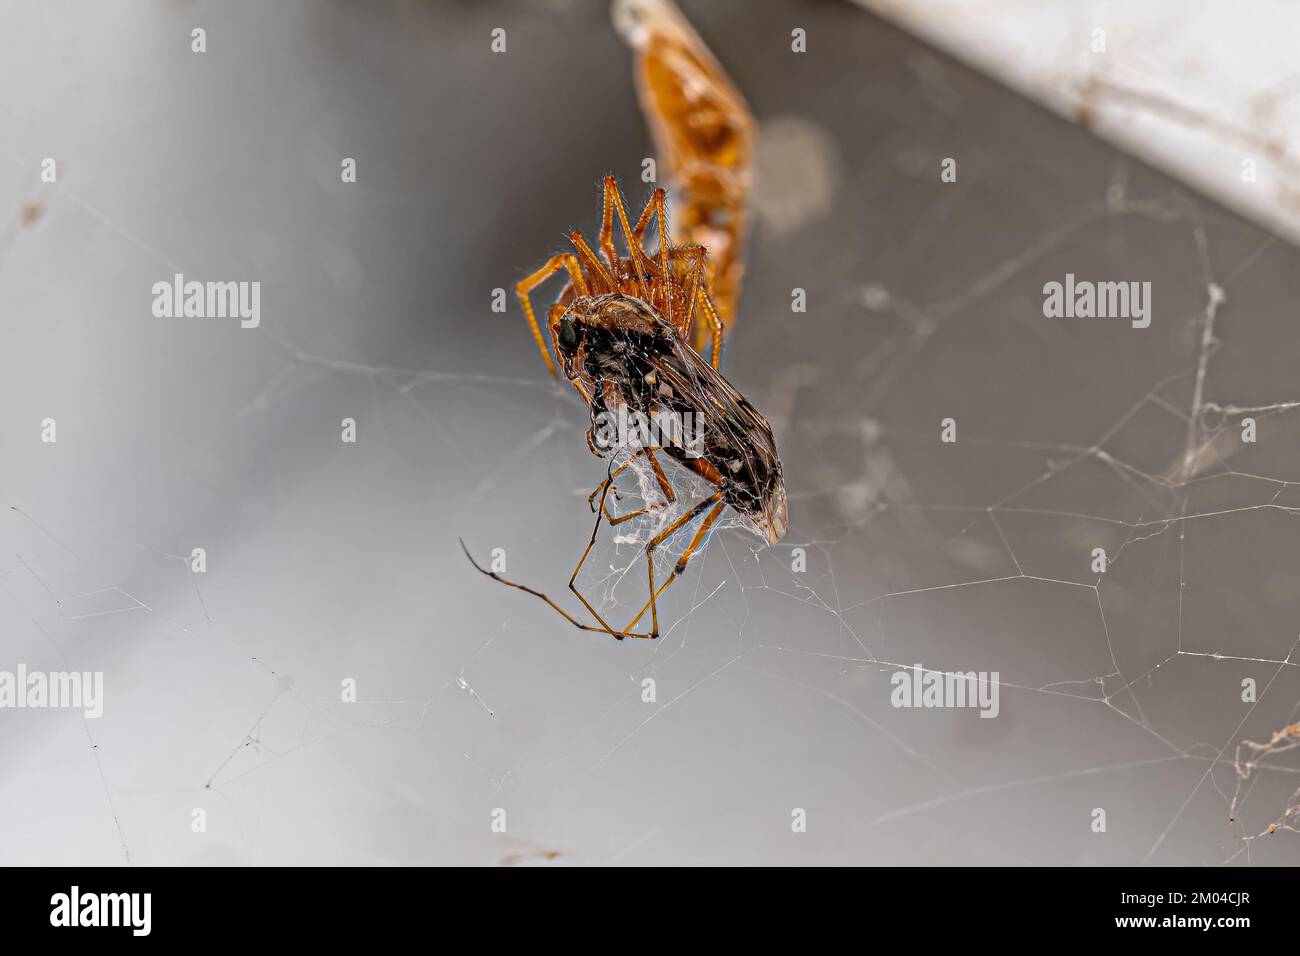 Red House Spider of the species Nesticodes rufipes preying on a fly Stock Photo